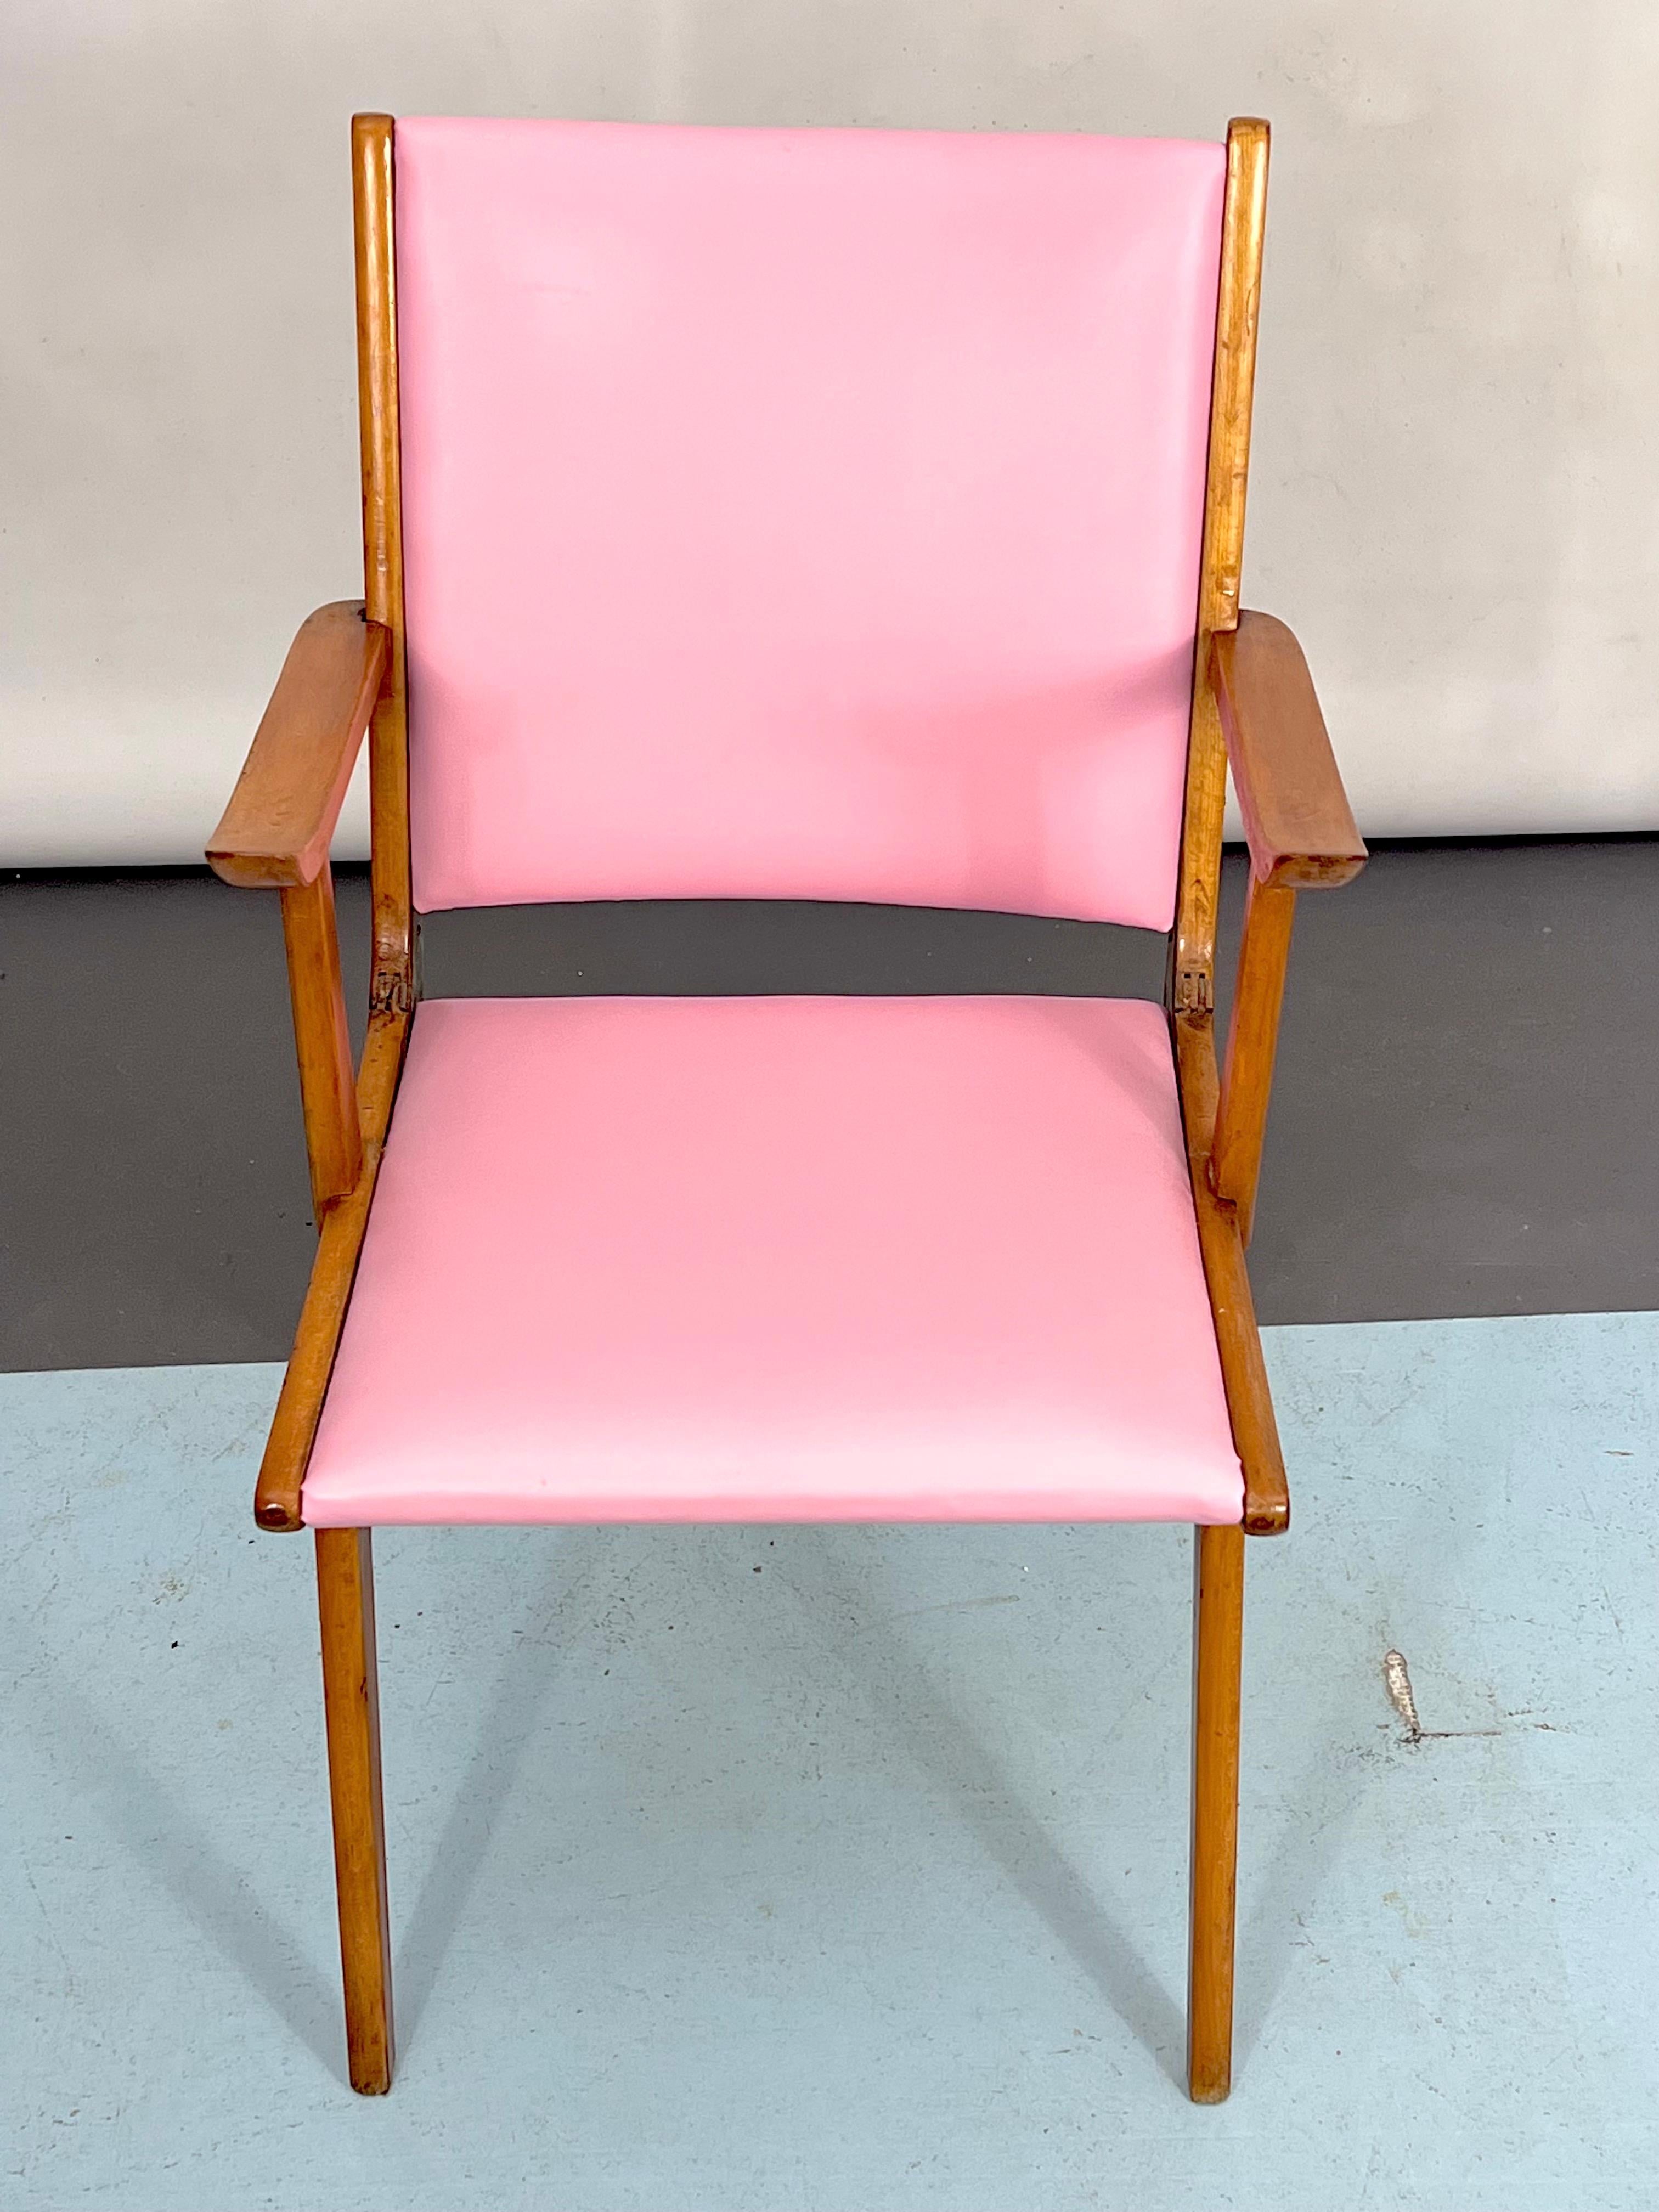 Vintage Italian Wood Accent Chair in Pink Leatherette, Italy, 1950s For Sale 2